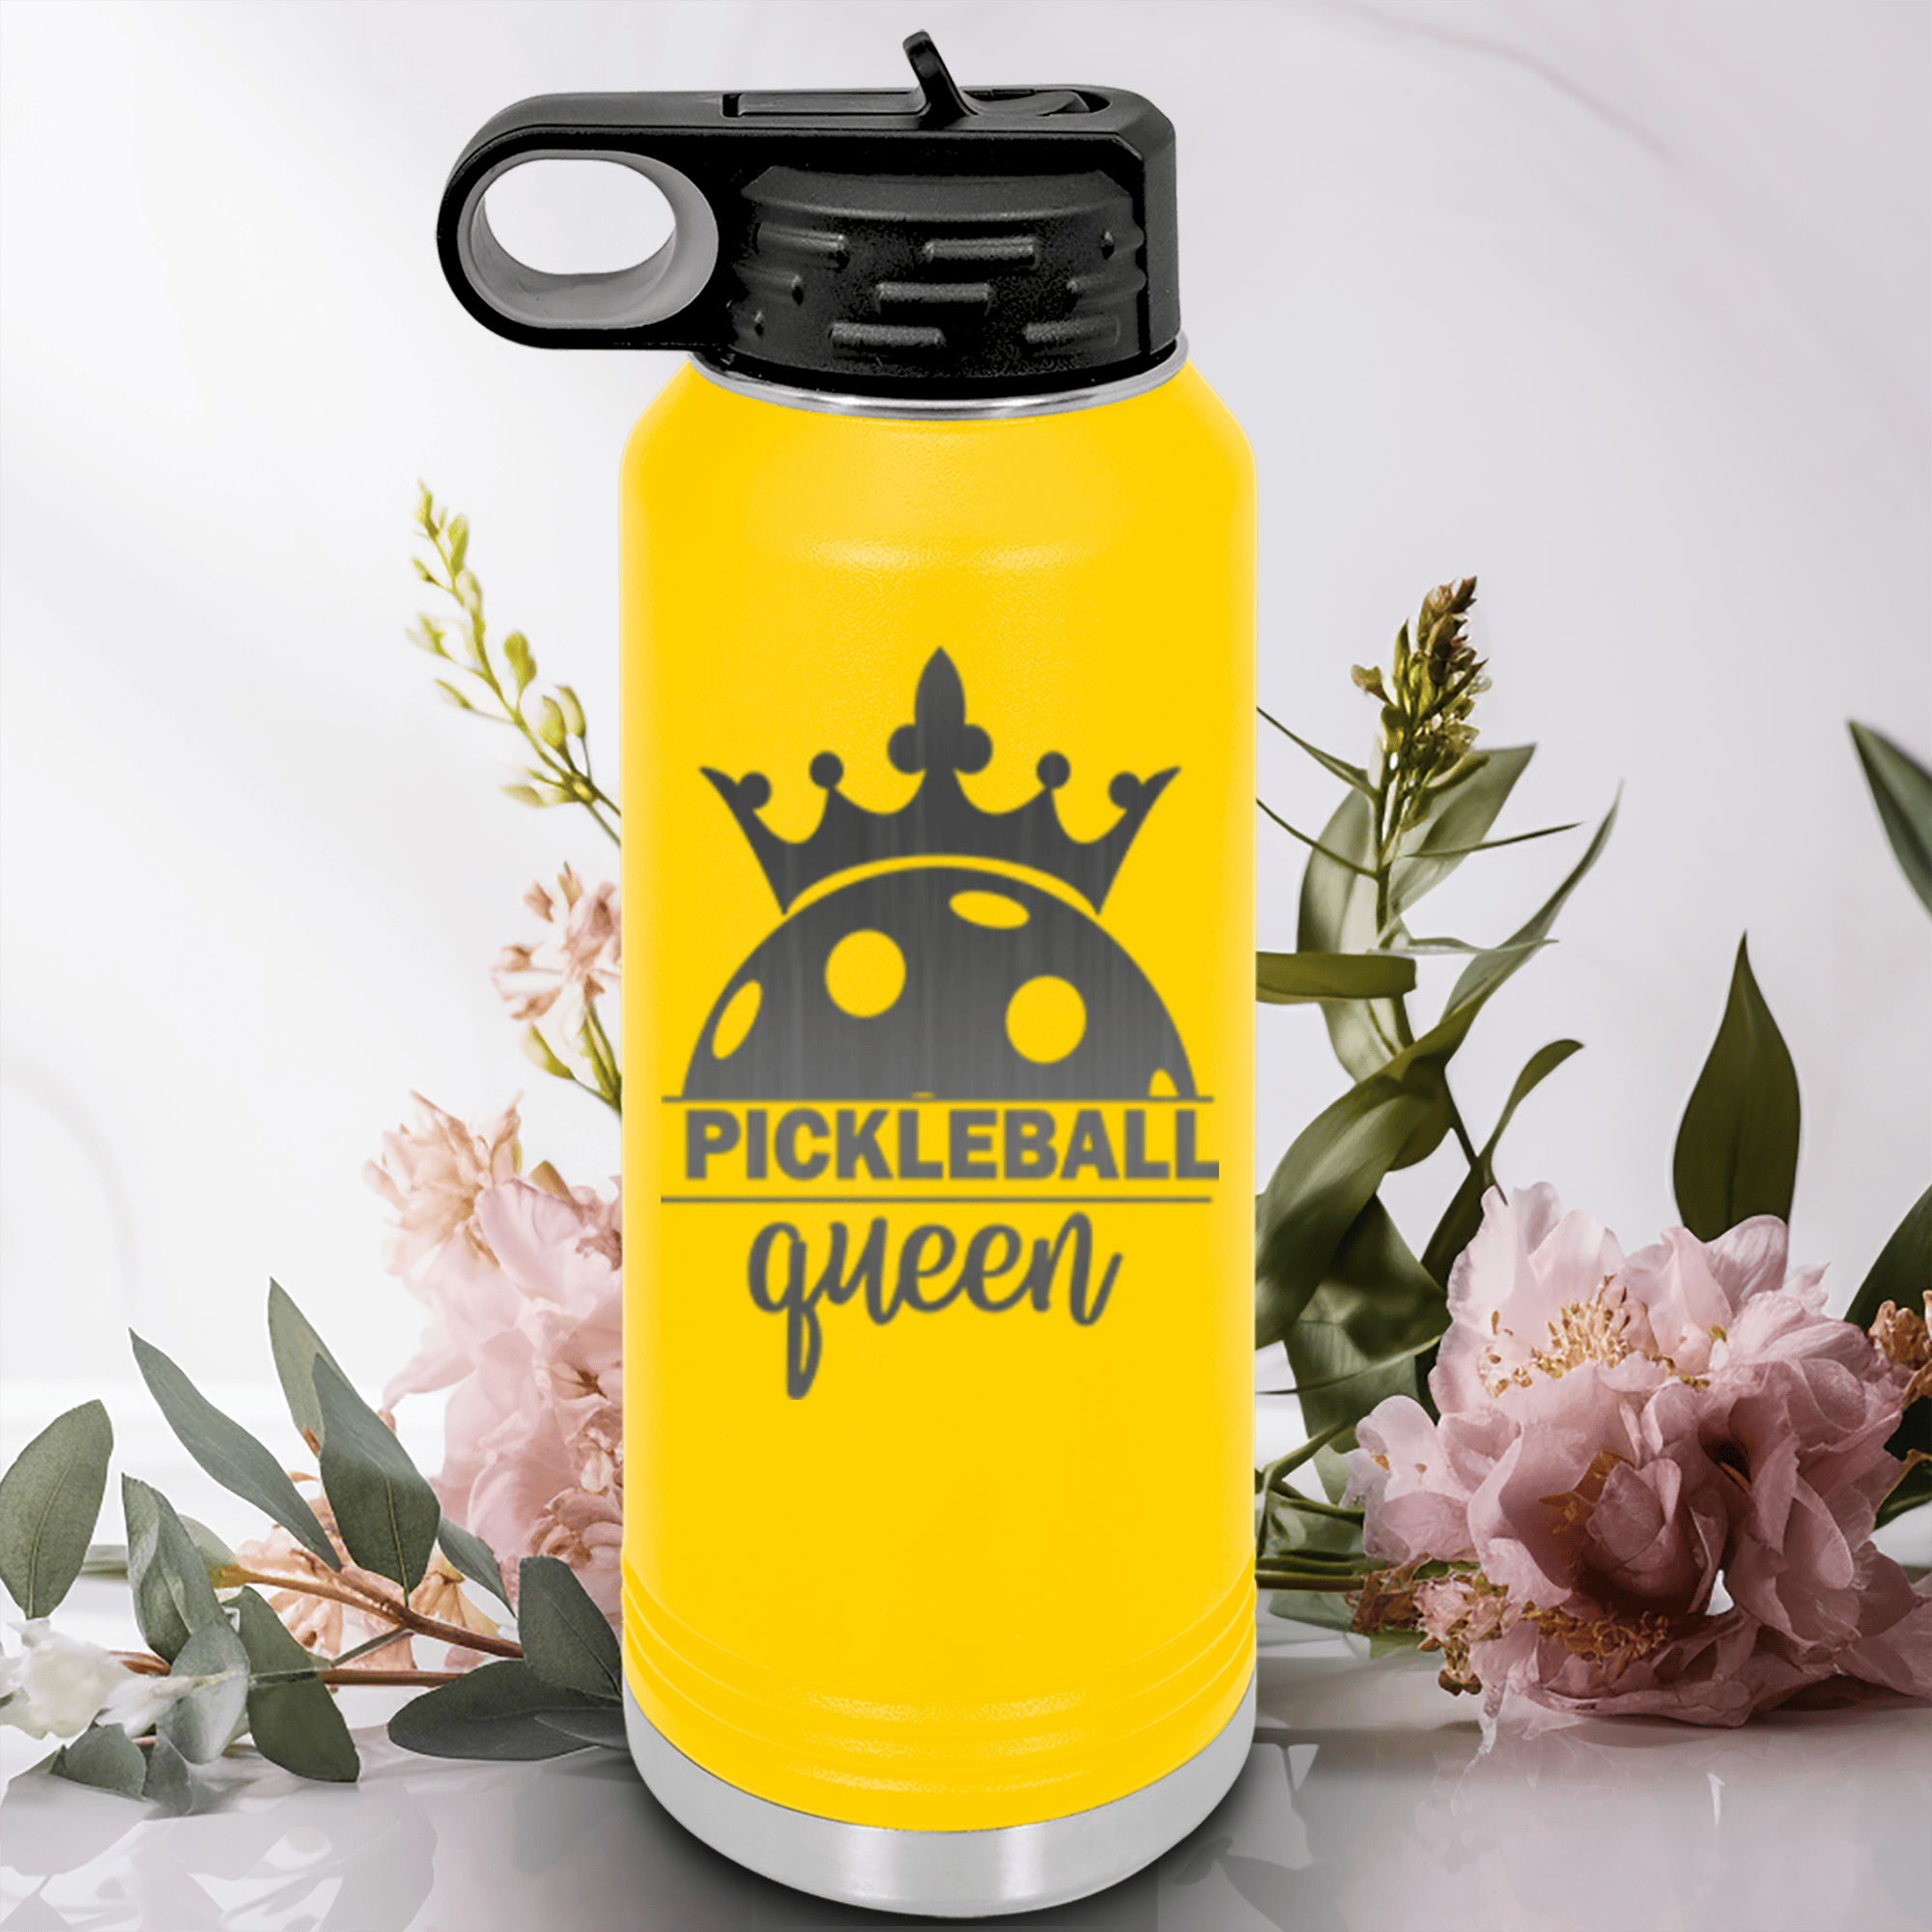 Yellow Pickleball Water Bottle With Pickle Queen Design